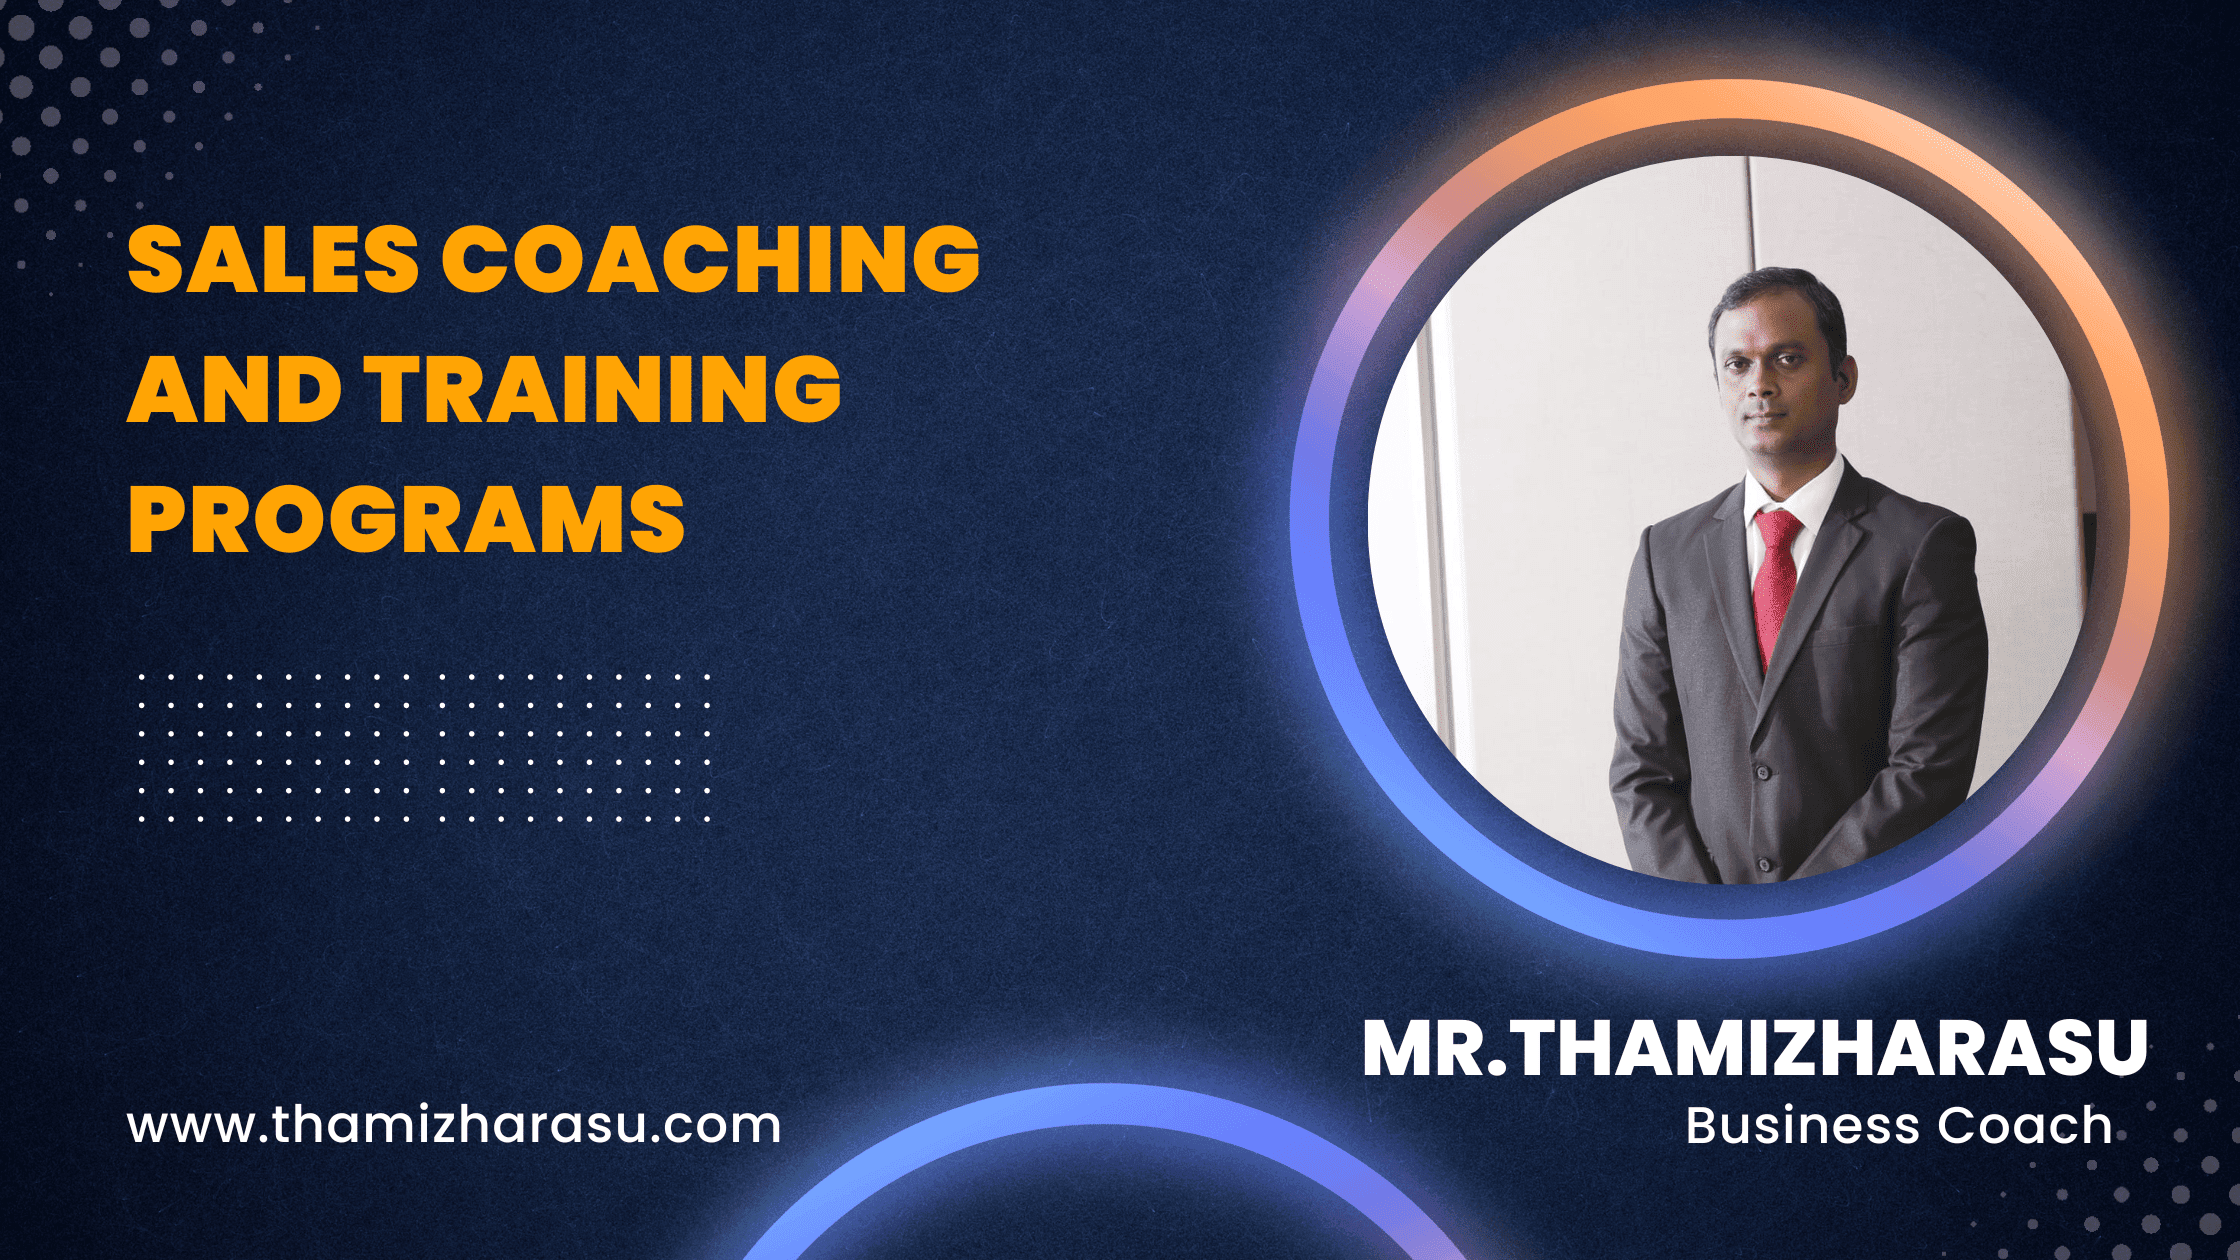 Sales coaching and training programs